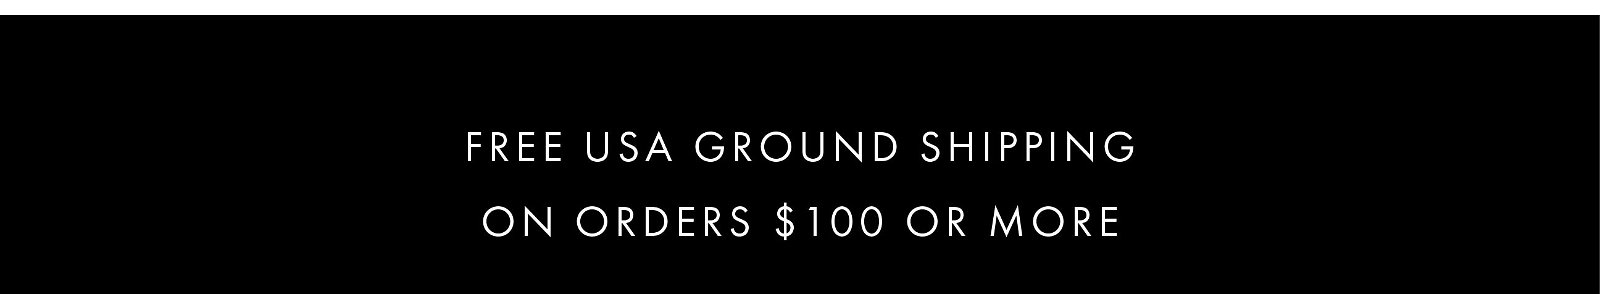 "Free USA ground shipping on orders \\$100 or more" >> Shop Generation Love